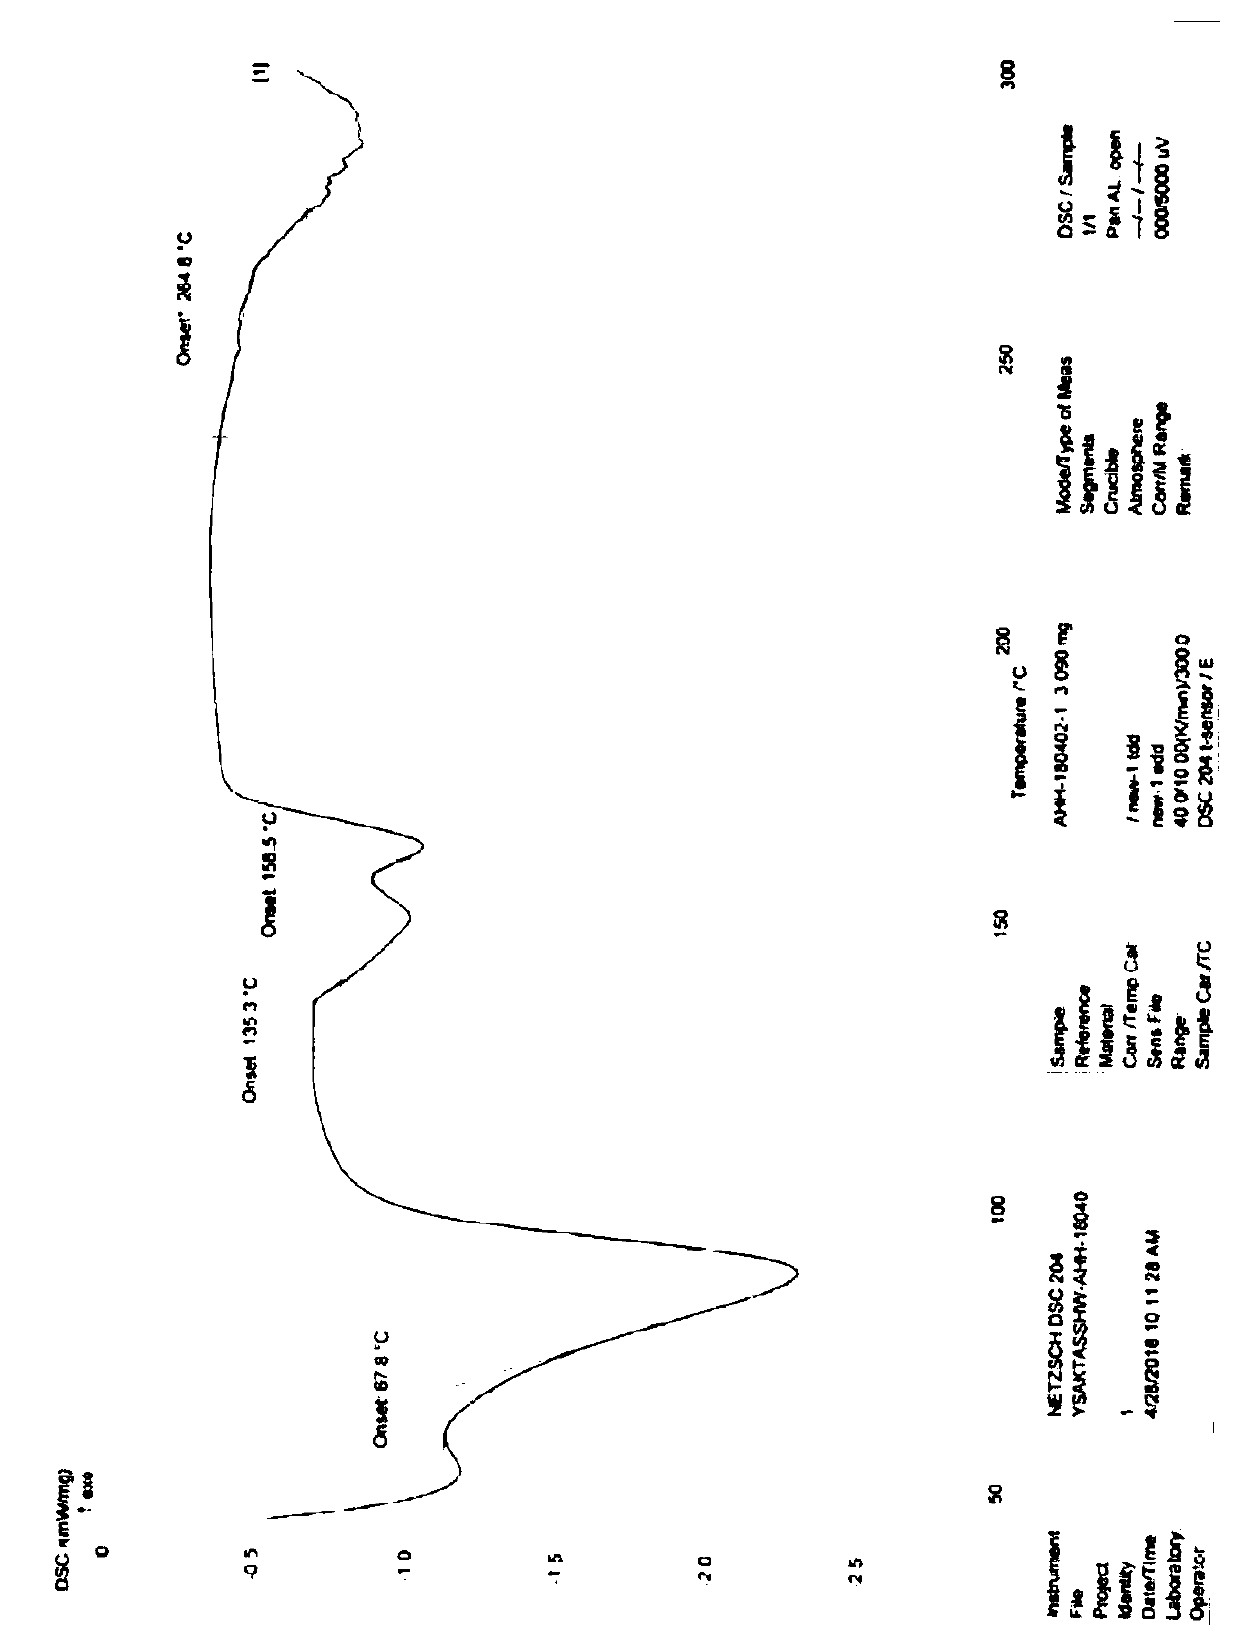 Industrial production method of acotiamide hydrochloride